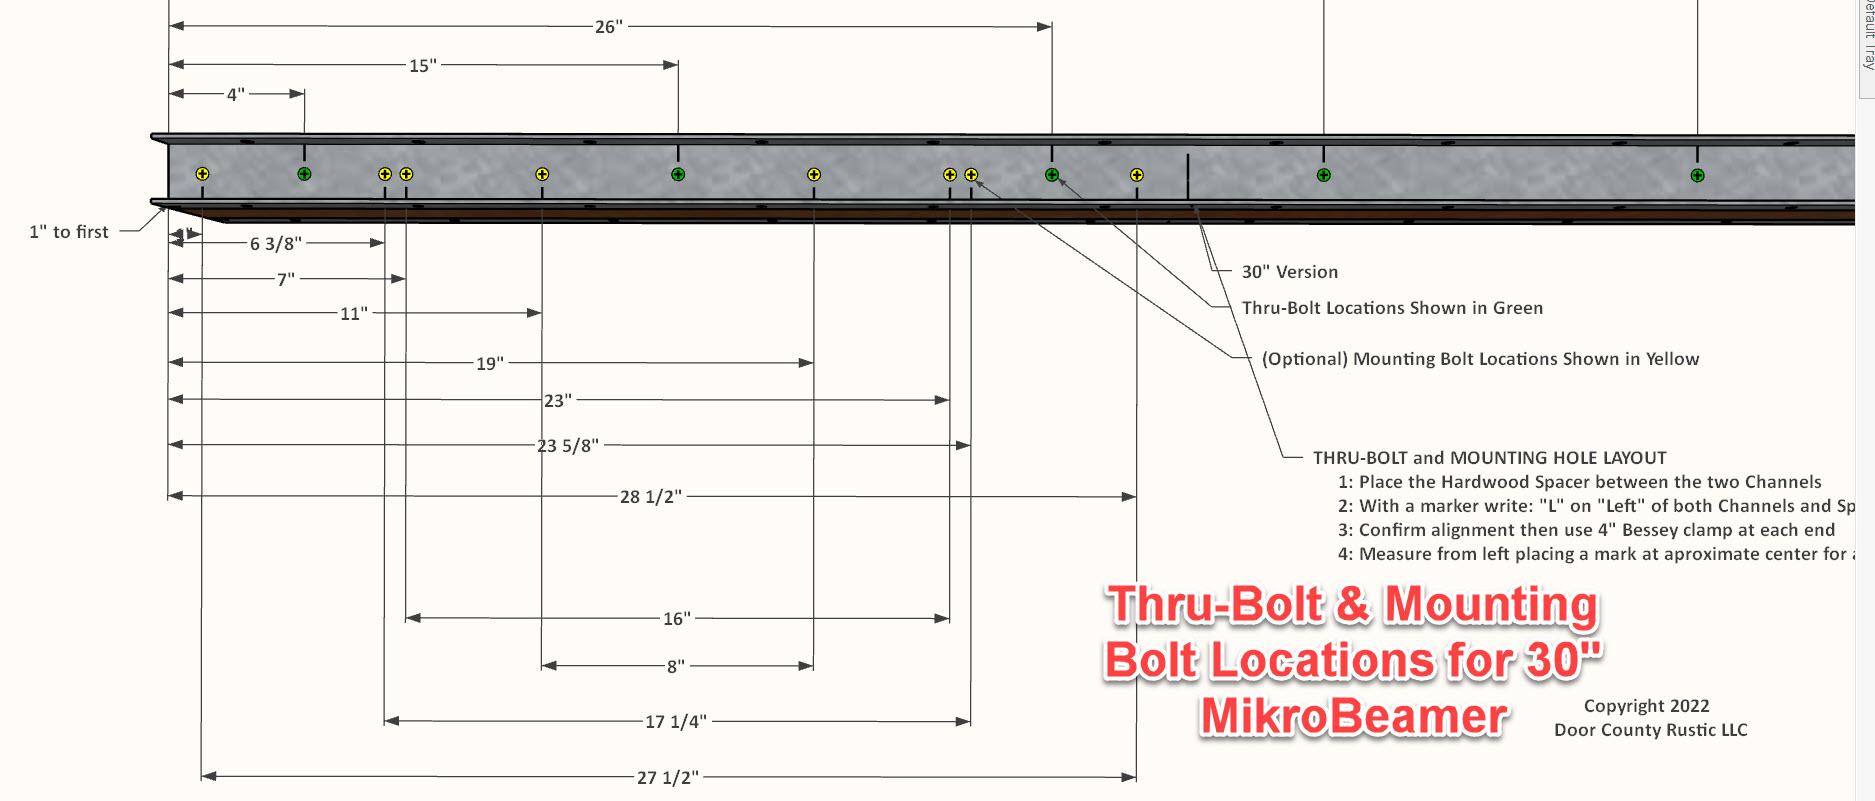 Thru-Bolt and Mounting Bolt Layout for 30 Inch MikroBeamer.jpg